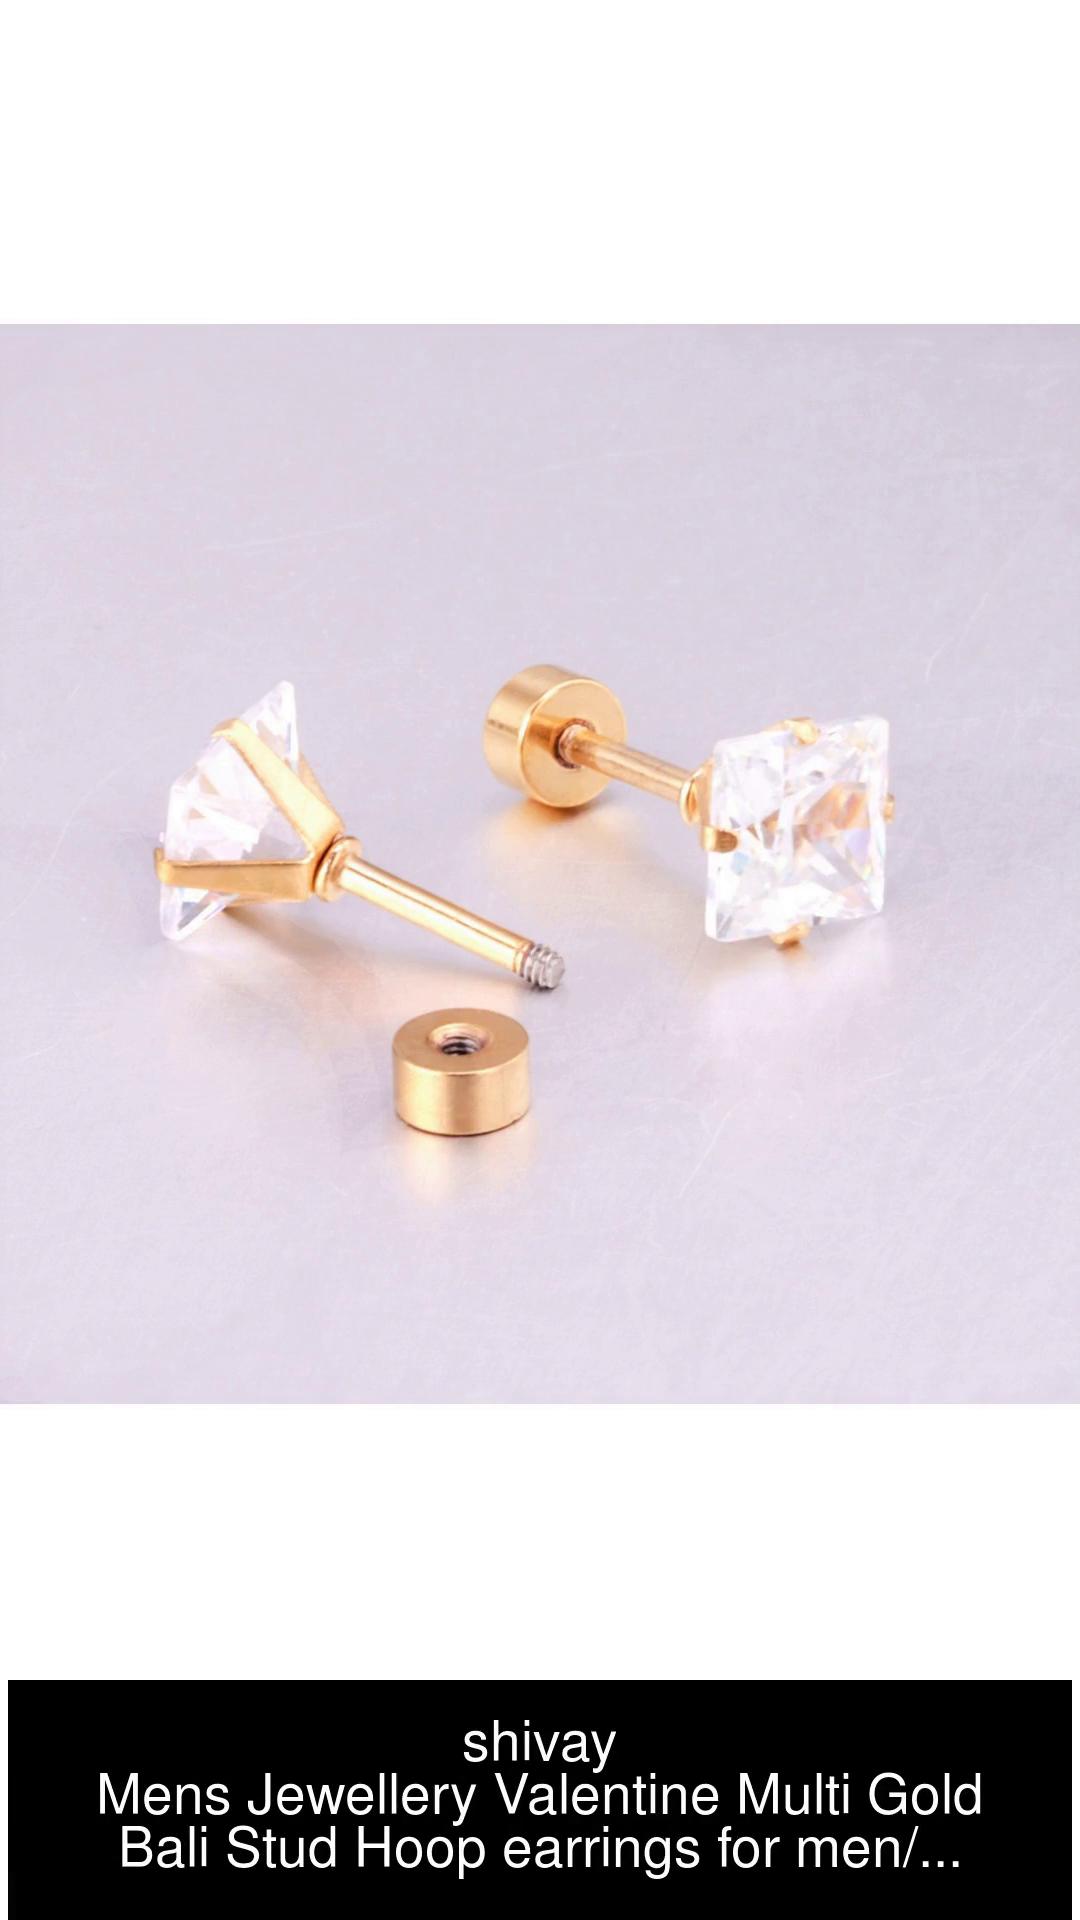 Buy 10K Gold Single Earring or Pair Safe Studs Baby Girl Online in India   Etsy